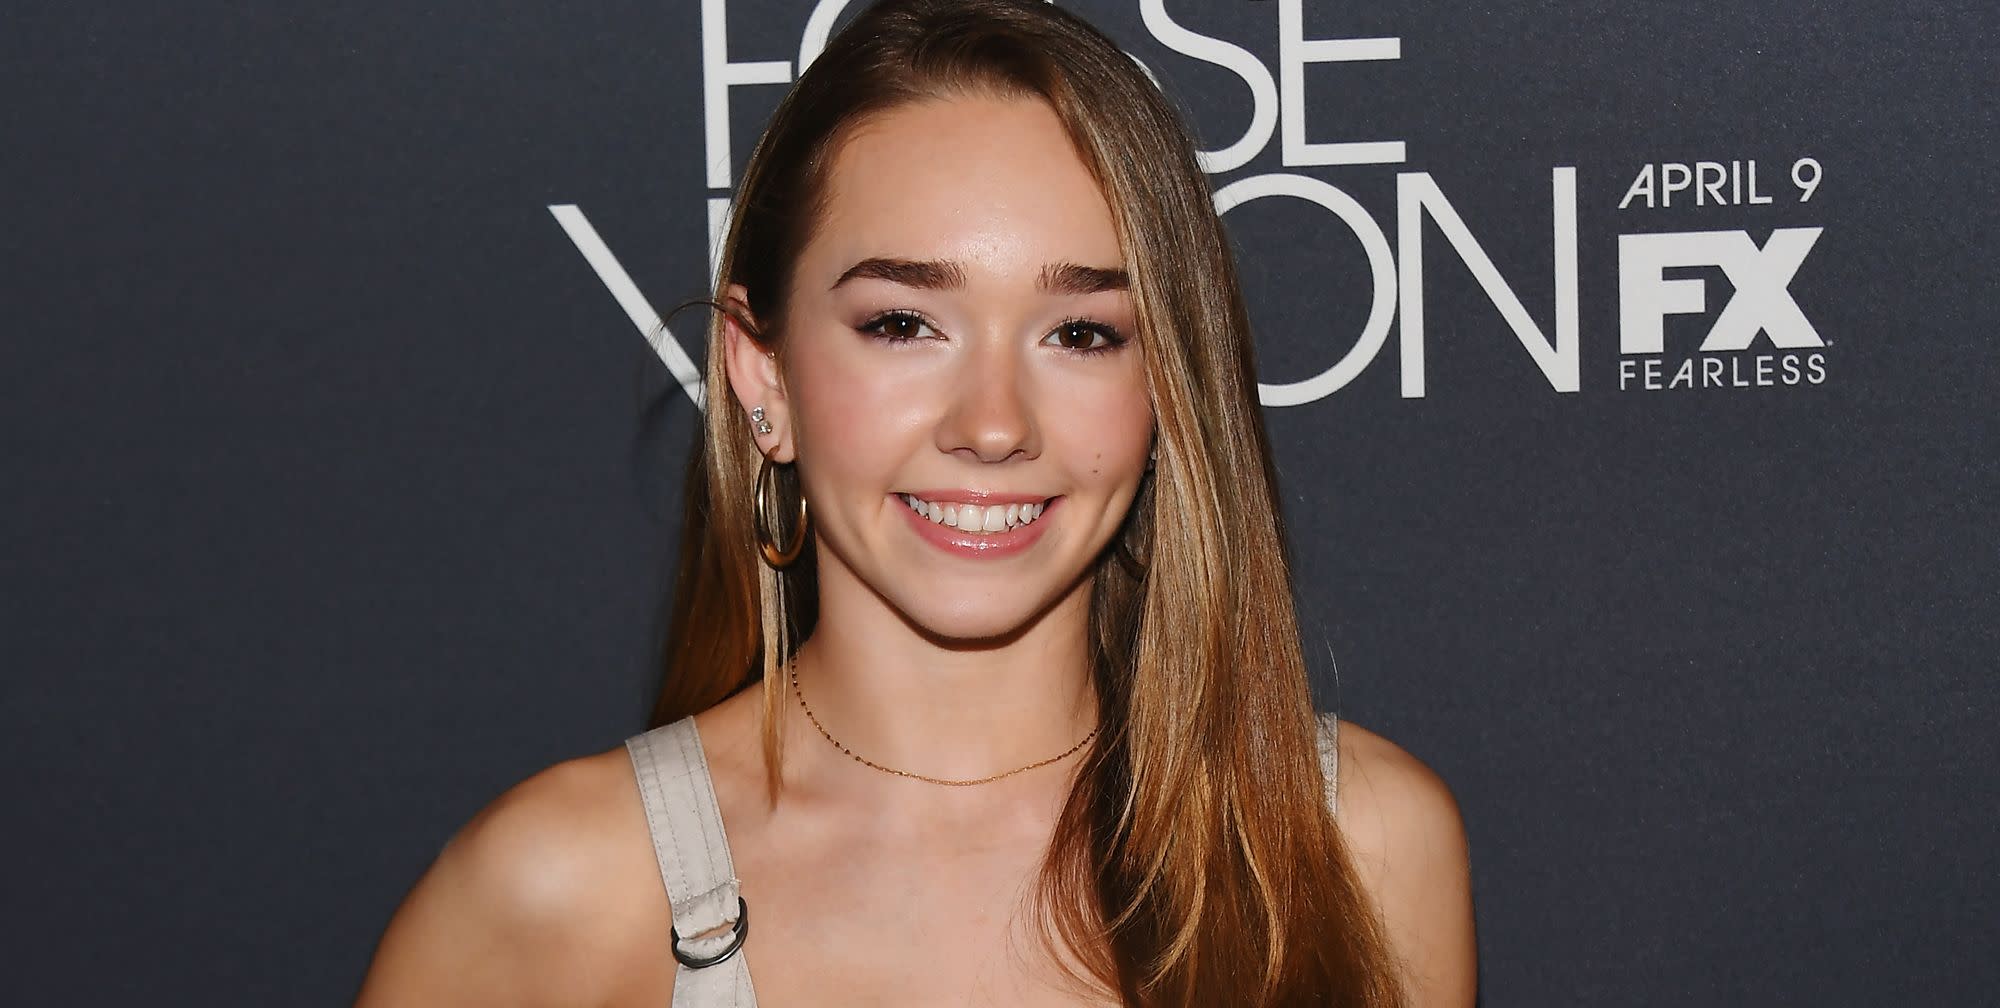 Manifest Season 3 Casts The Americans And The Good Doctor Star Holly Taylor As Flight 828 Passenger 